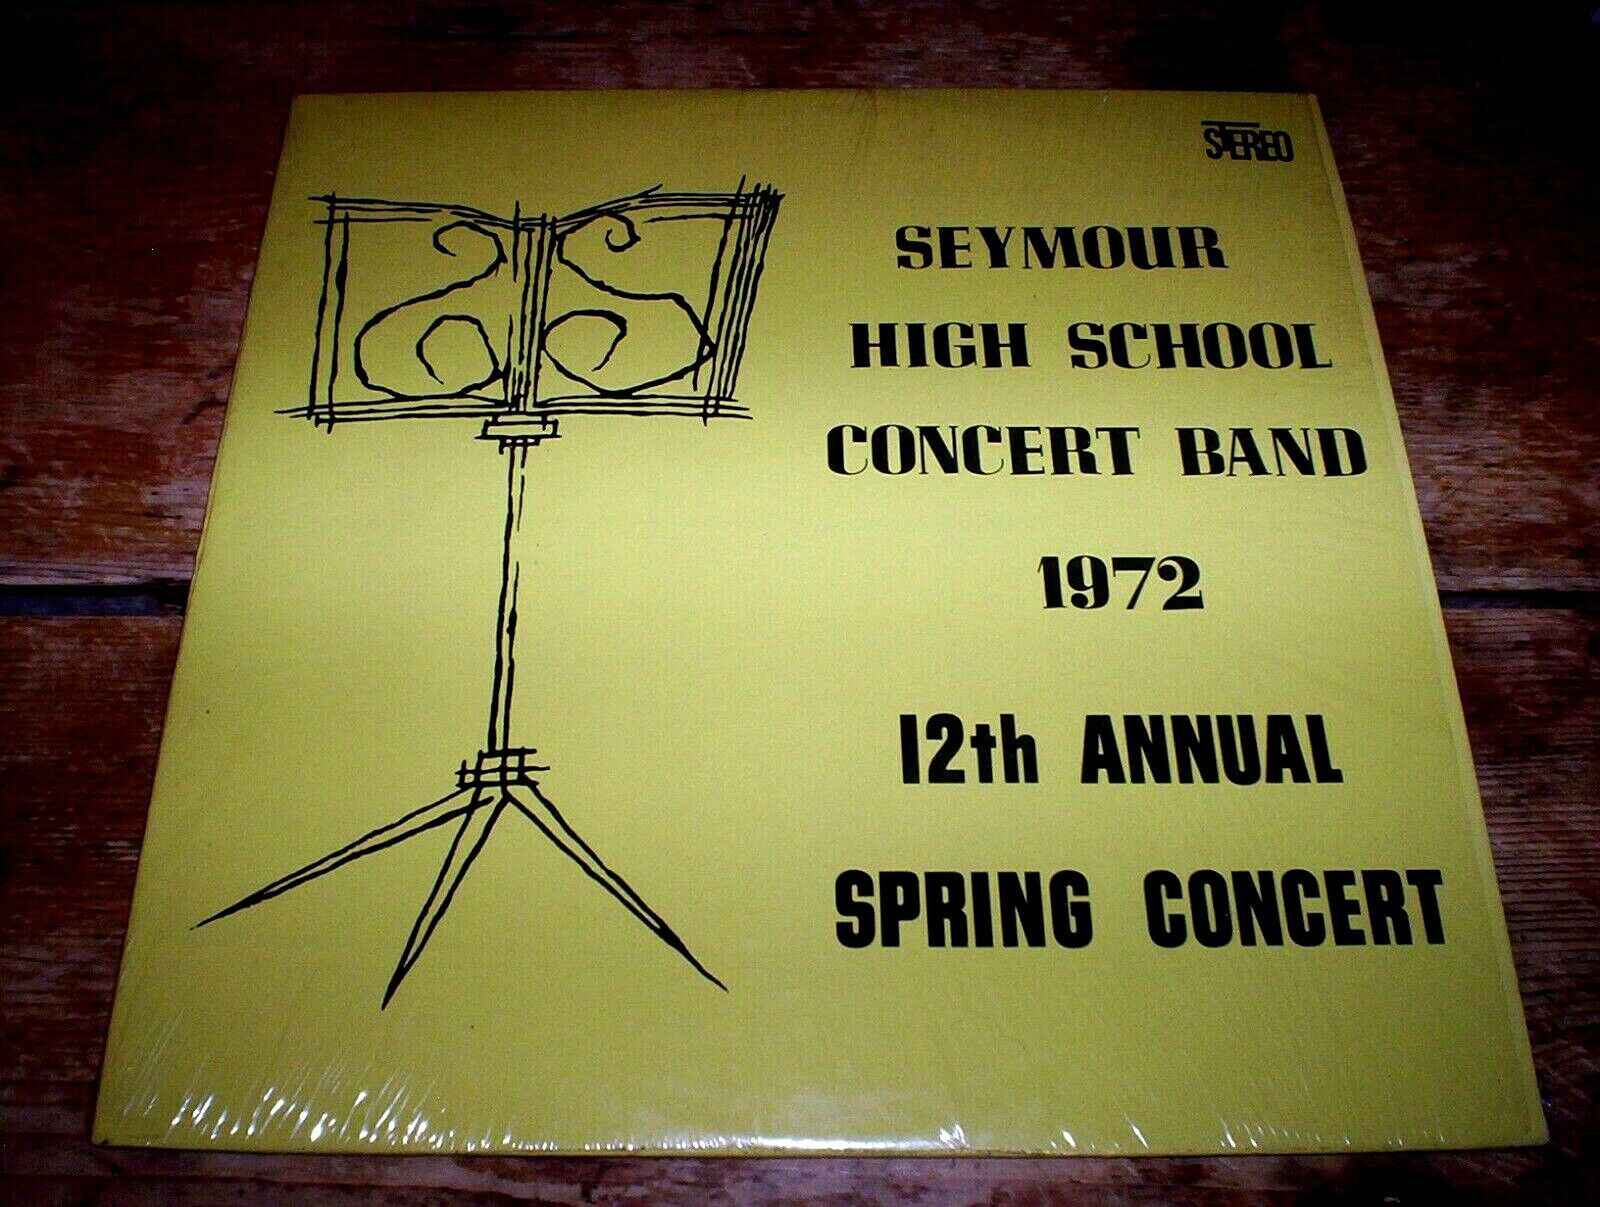 SEYMOUR HIGH SCHOOL CONCERT BAND 1972 12th ANNUAL SPRING CONCERT LP in shrink NM